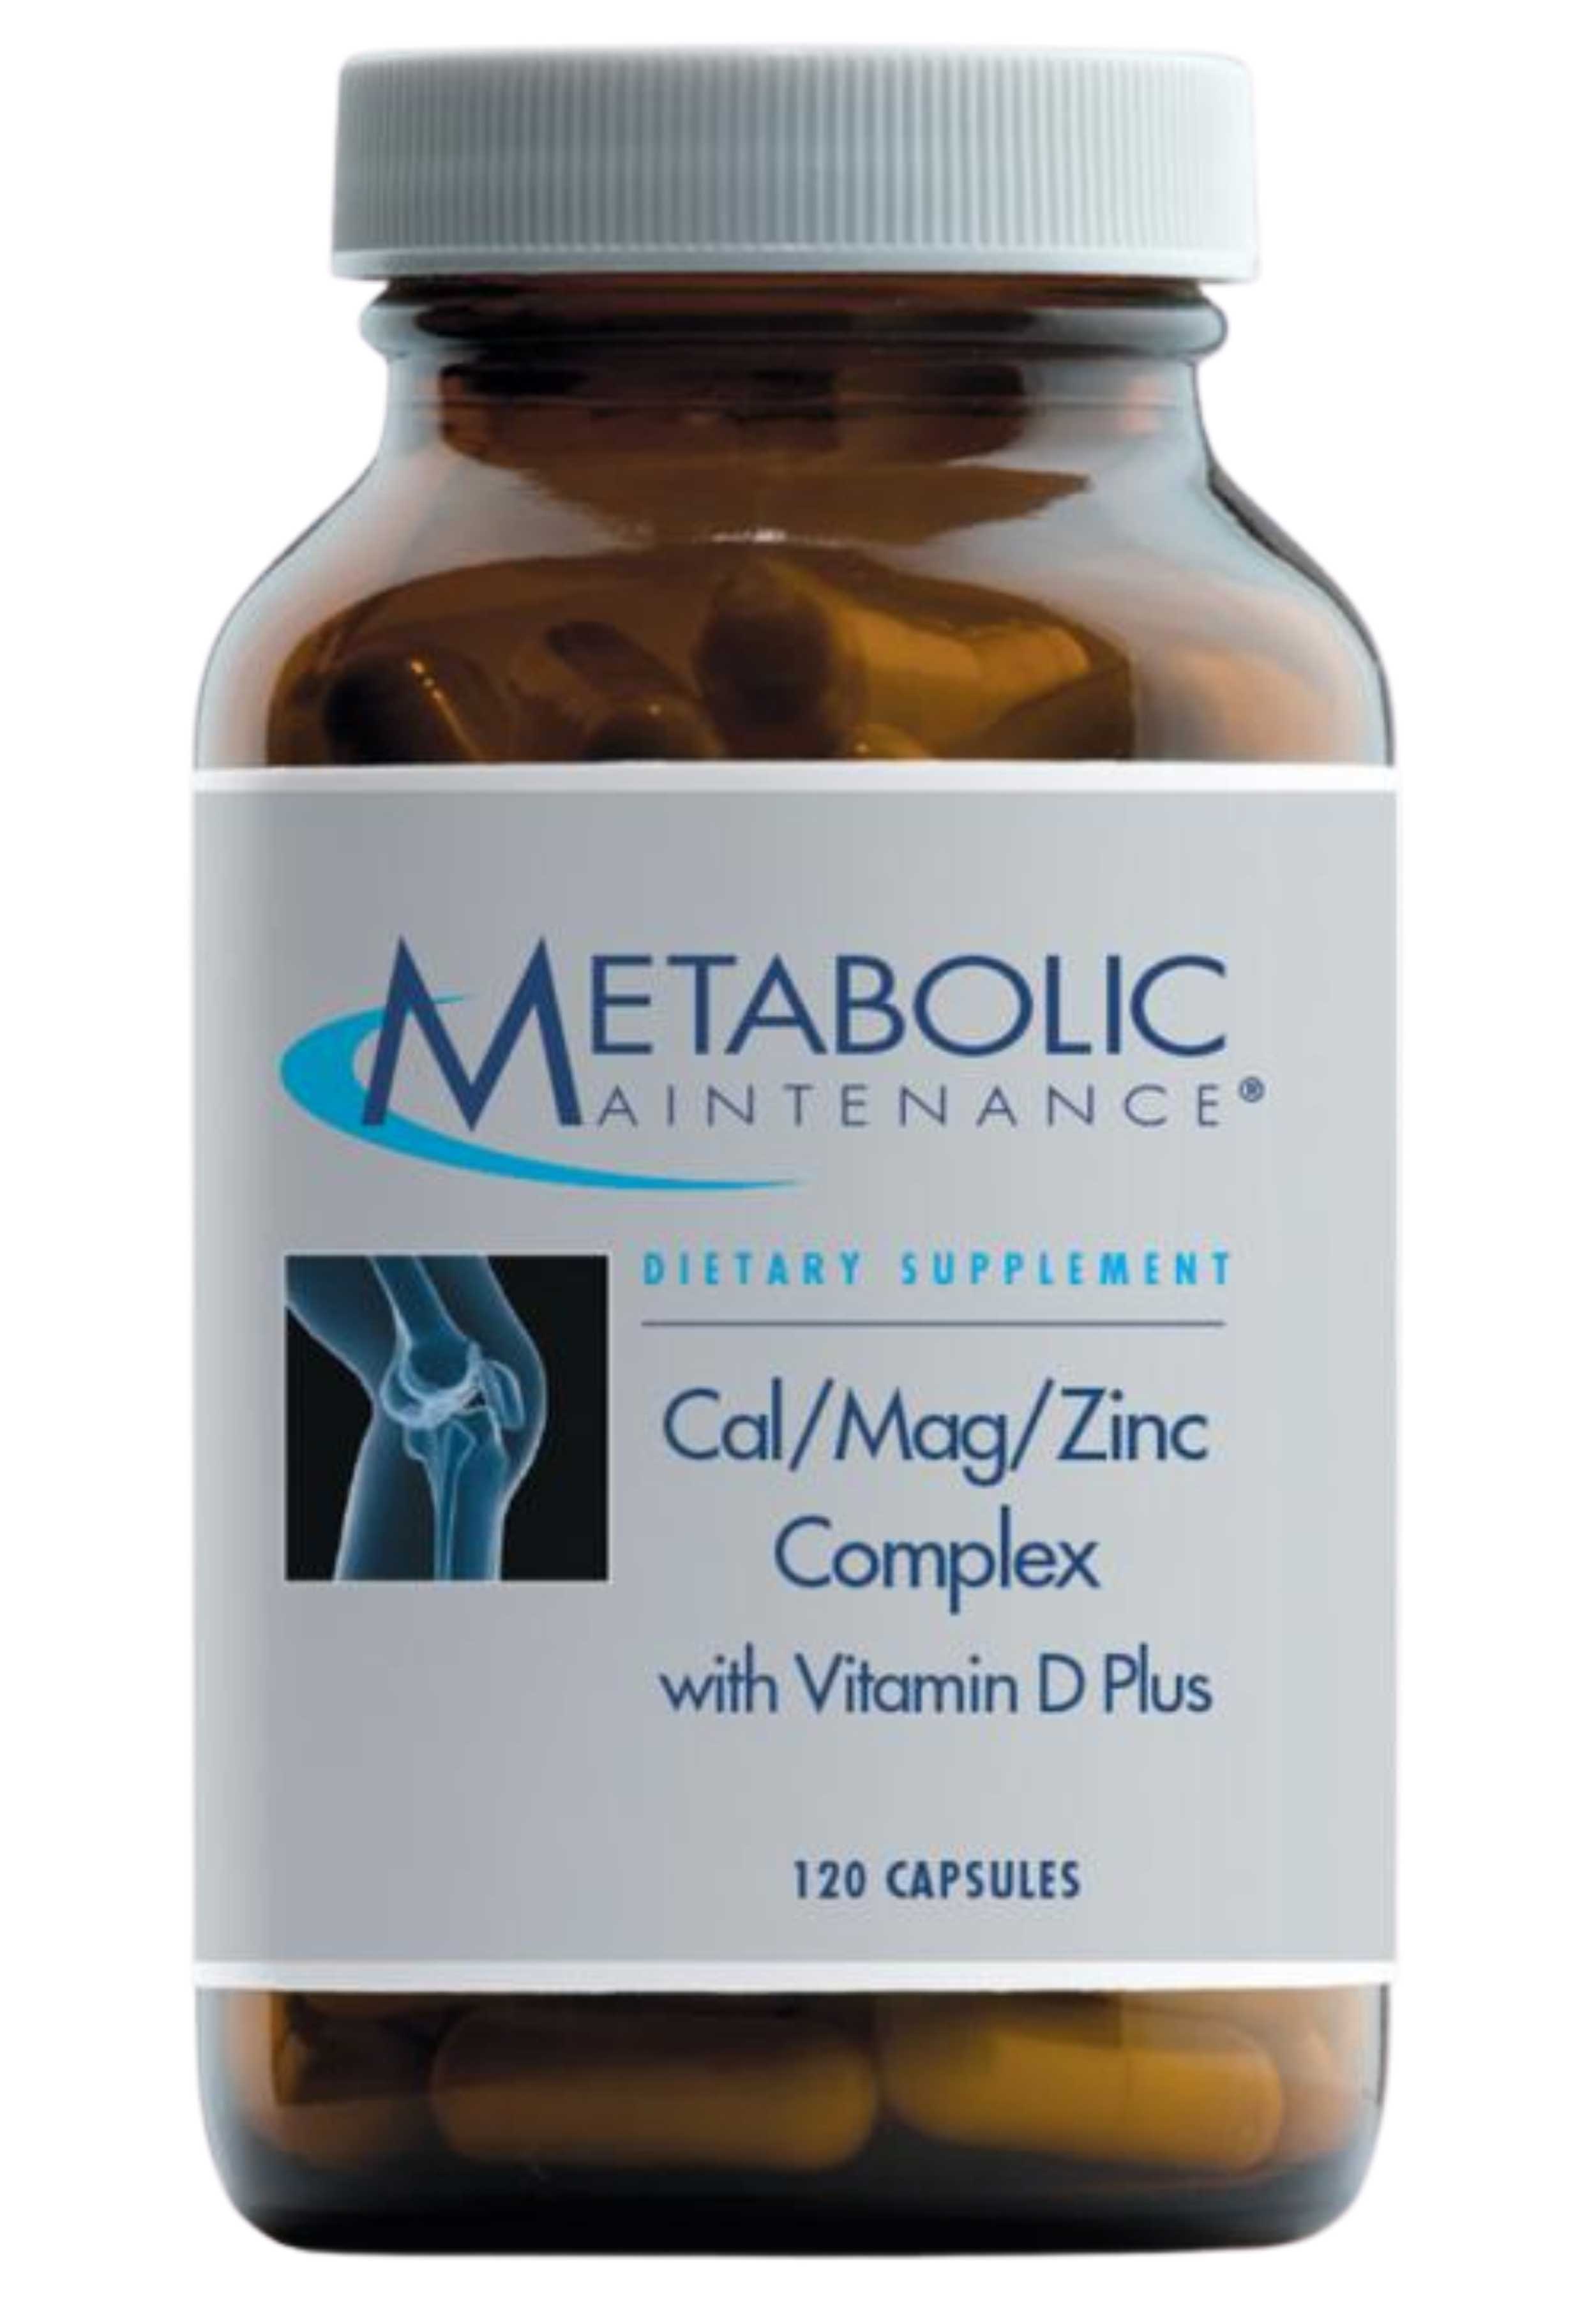 Metabolic Maintenance Cal/Mag/Zinc Complex with Vitamin D Plus